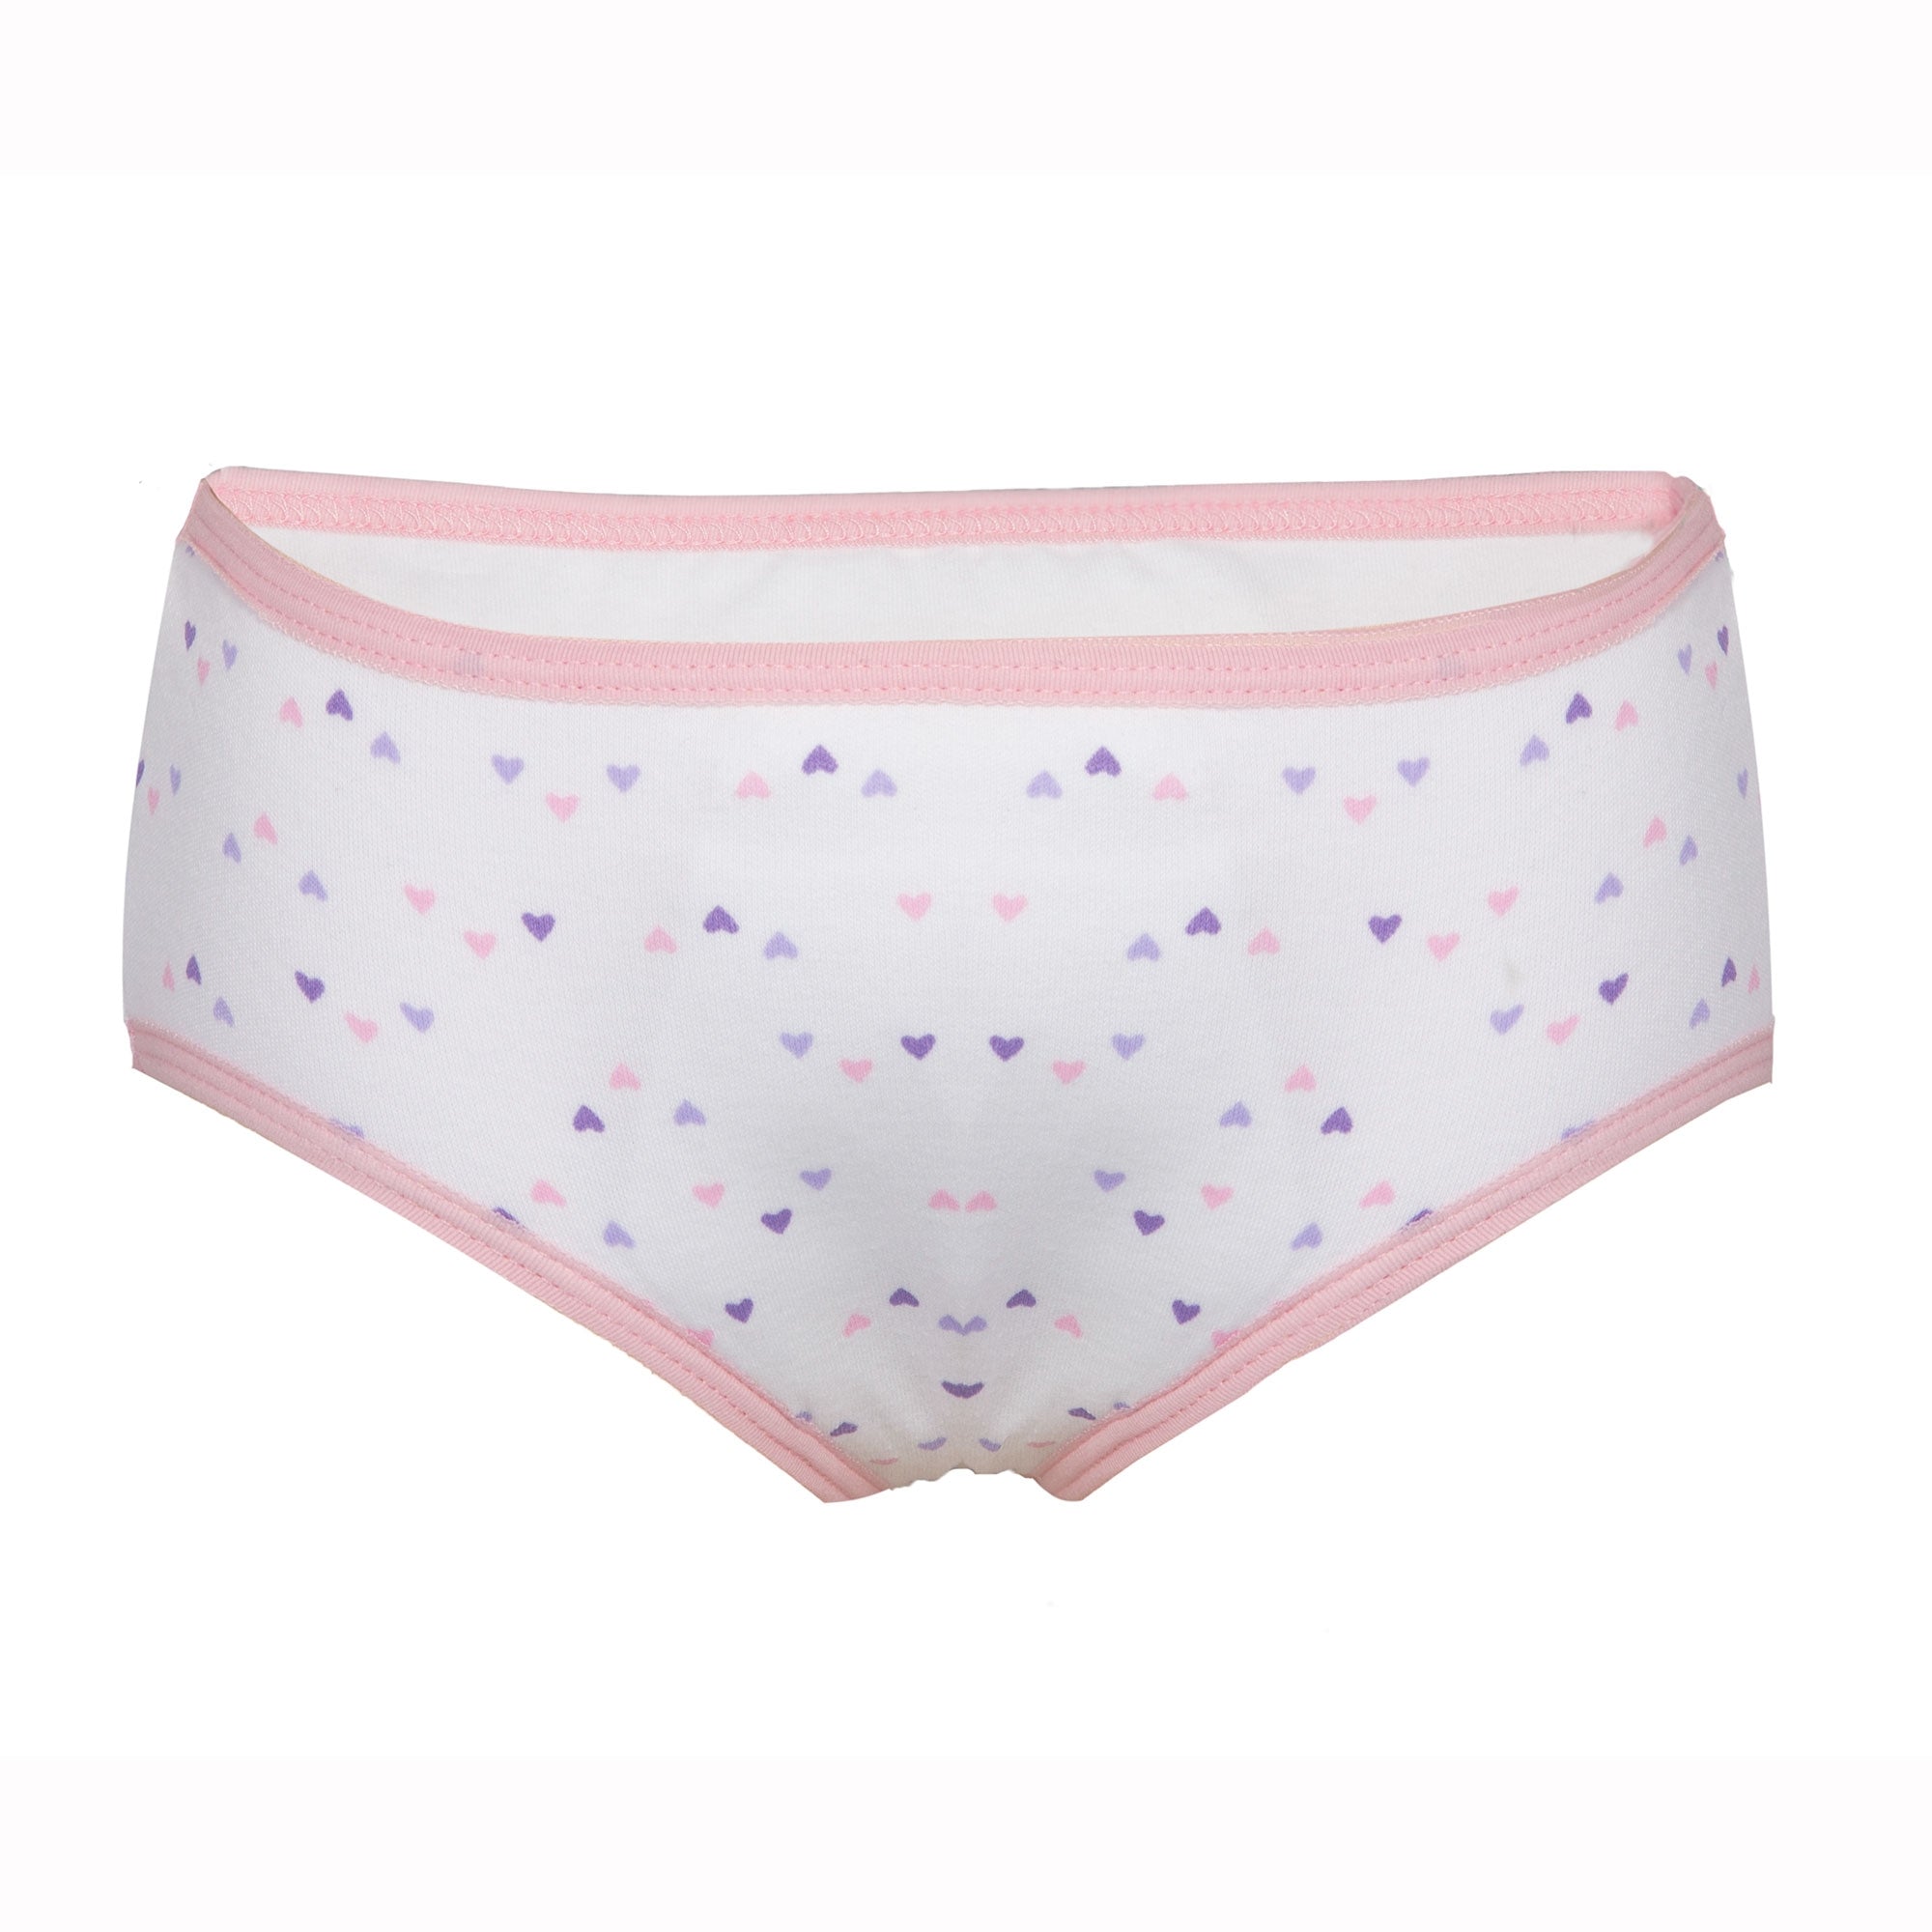 UndieShorts for Privacy and Fun for Little Girls - Clever Housewife